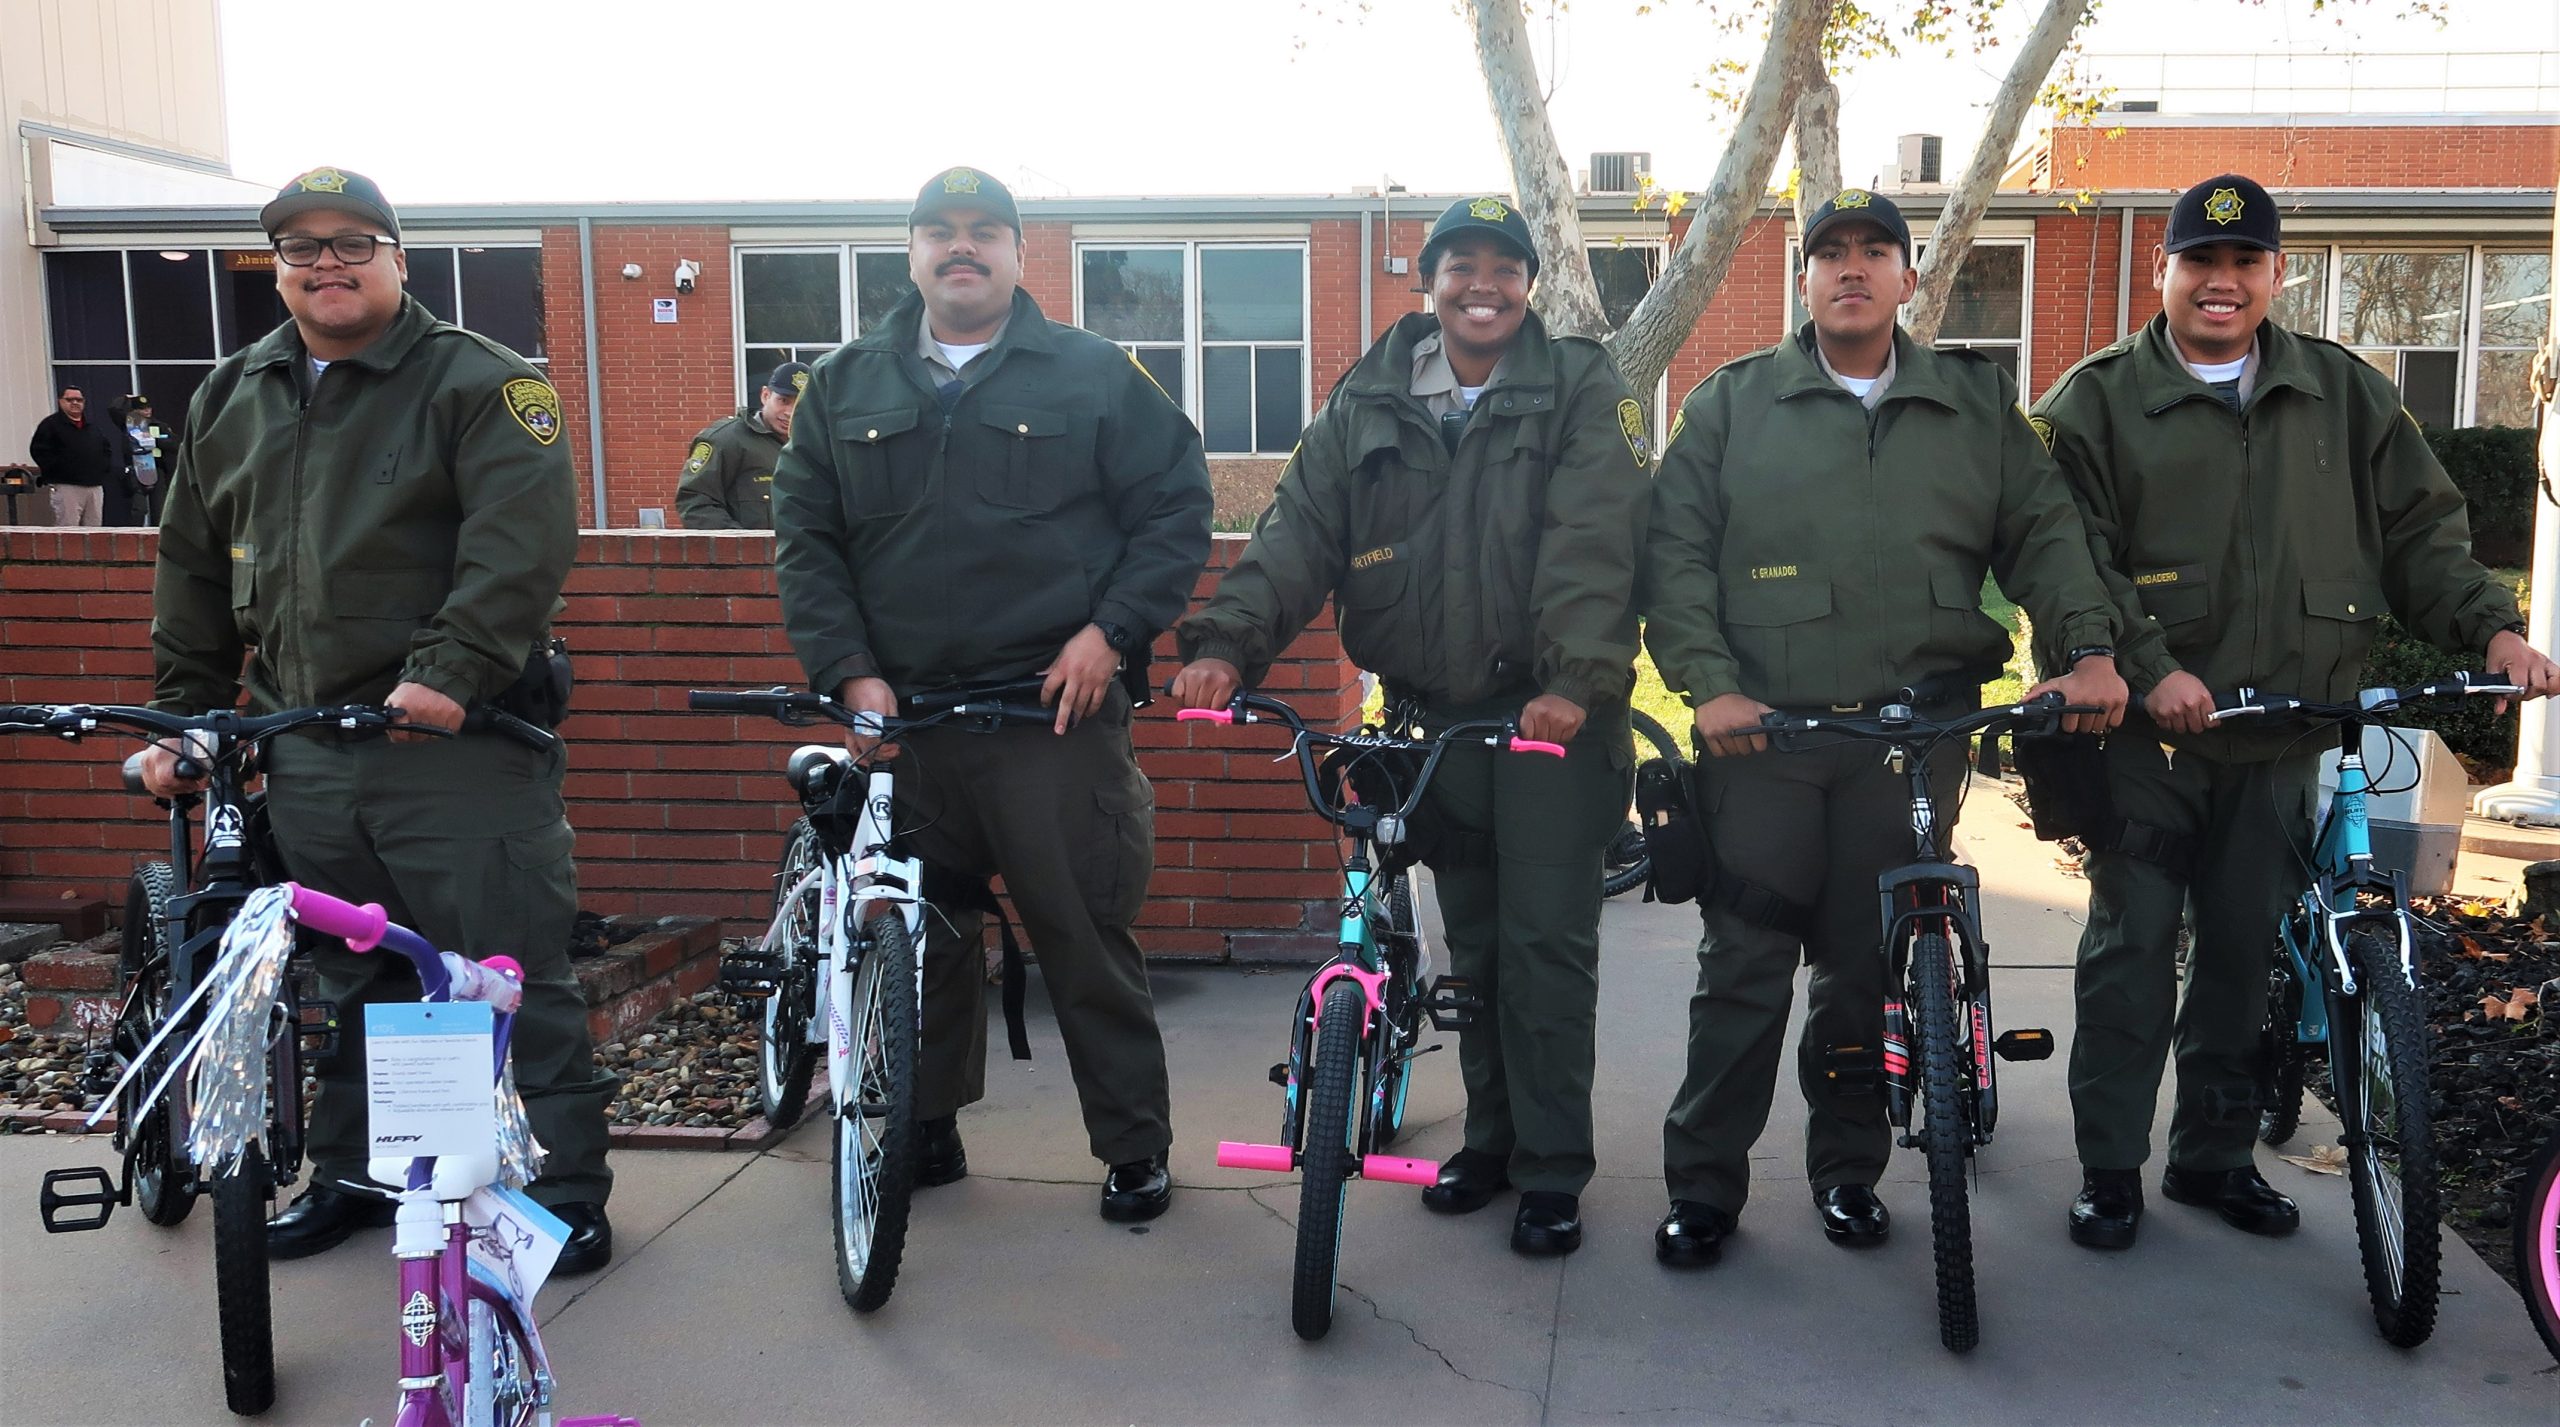 Correctional training center cadets stand beside bicycles.